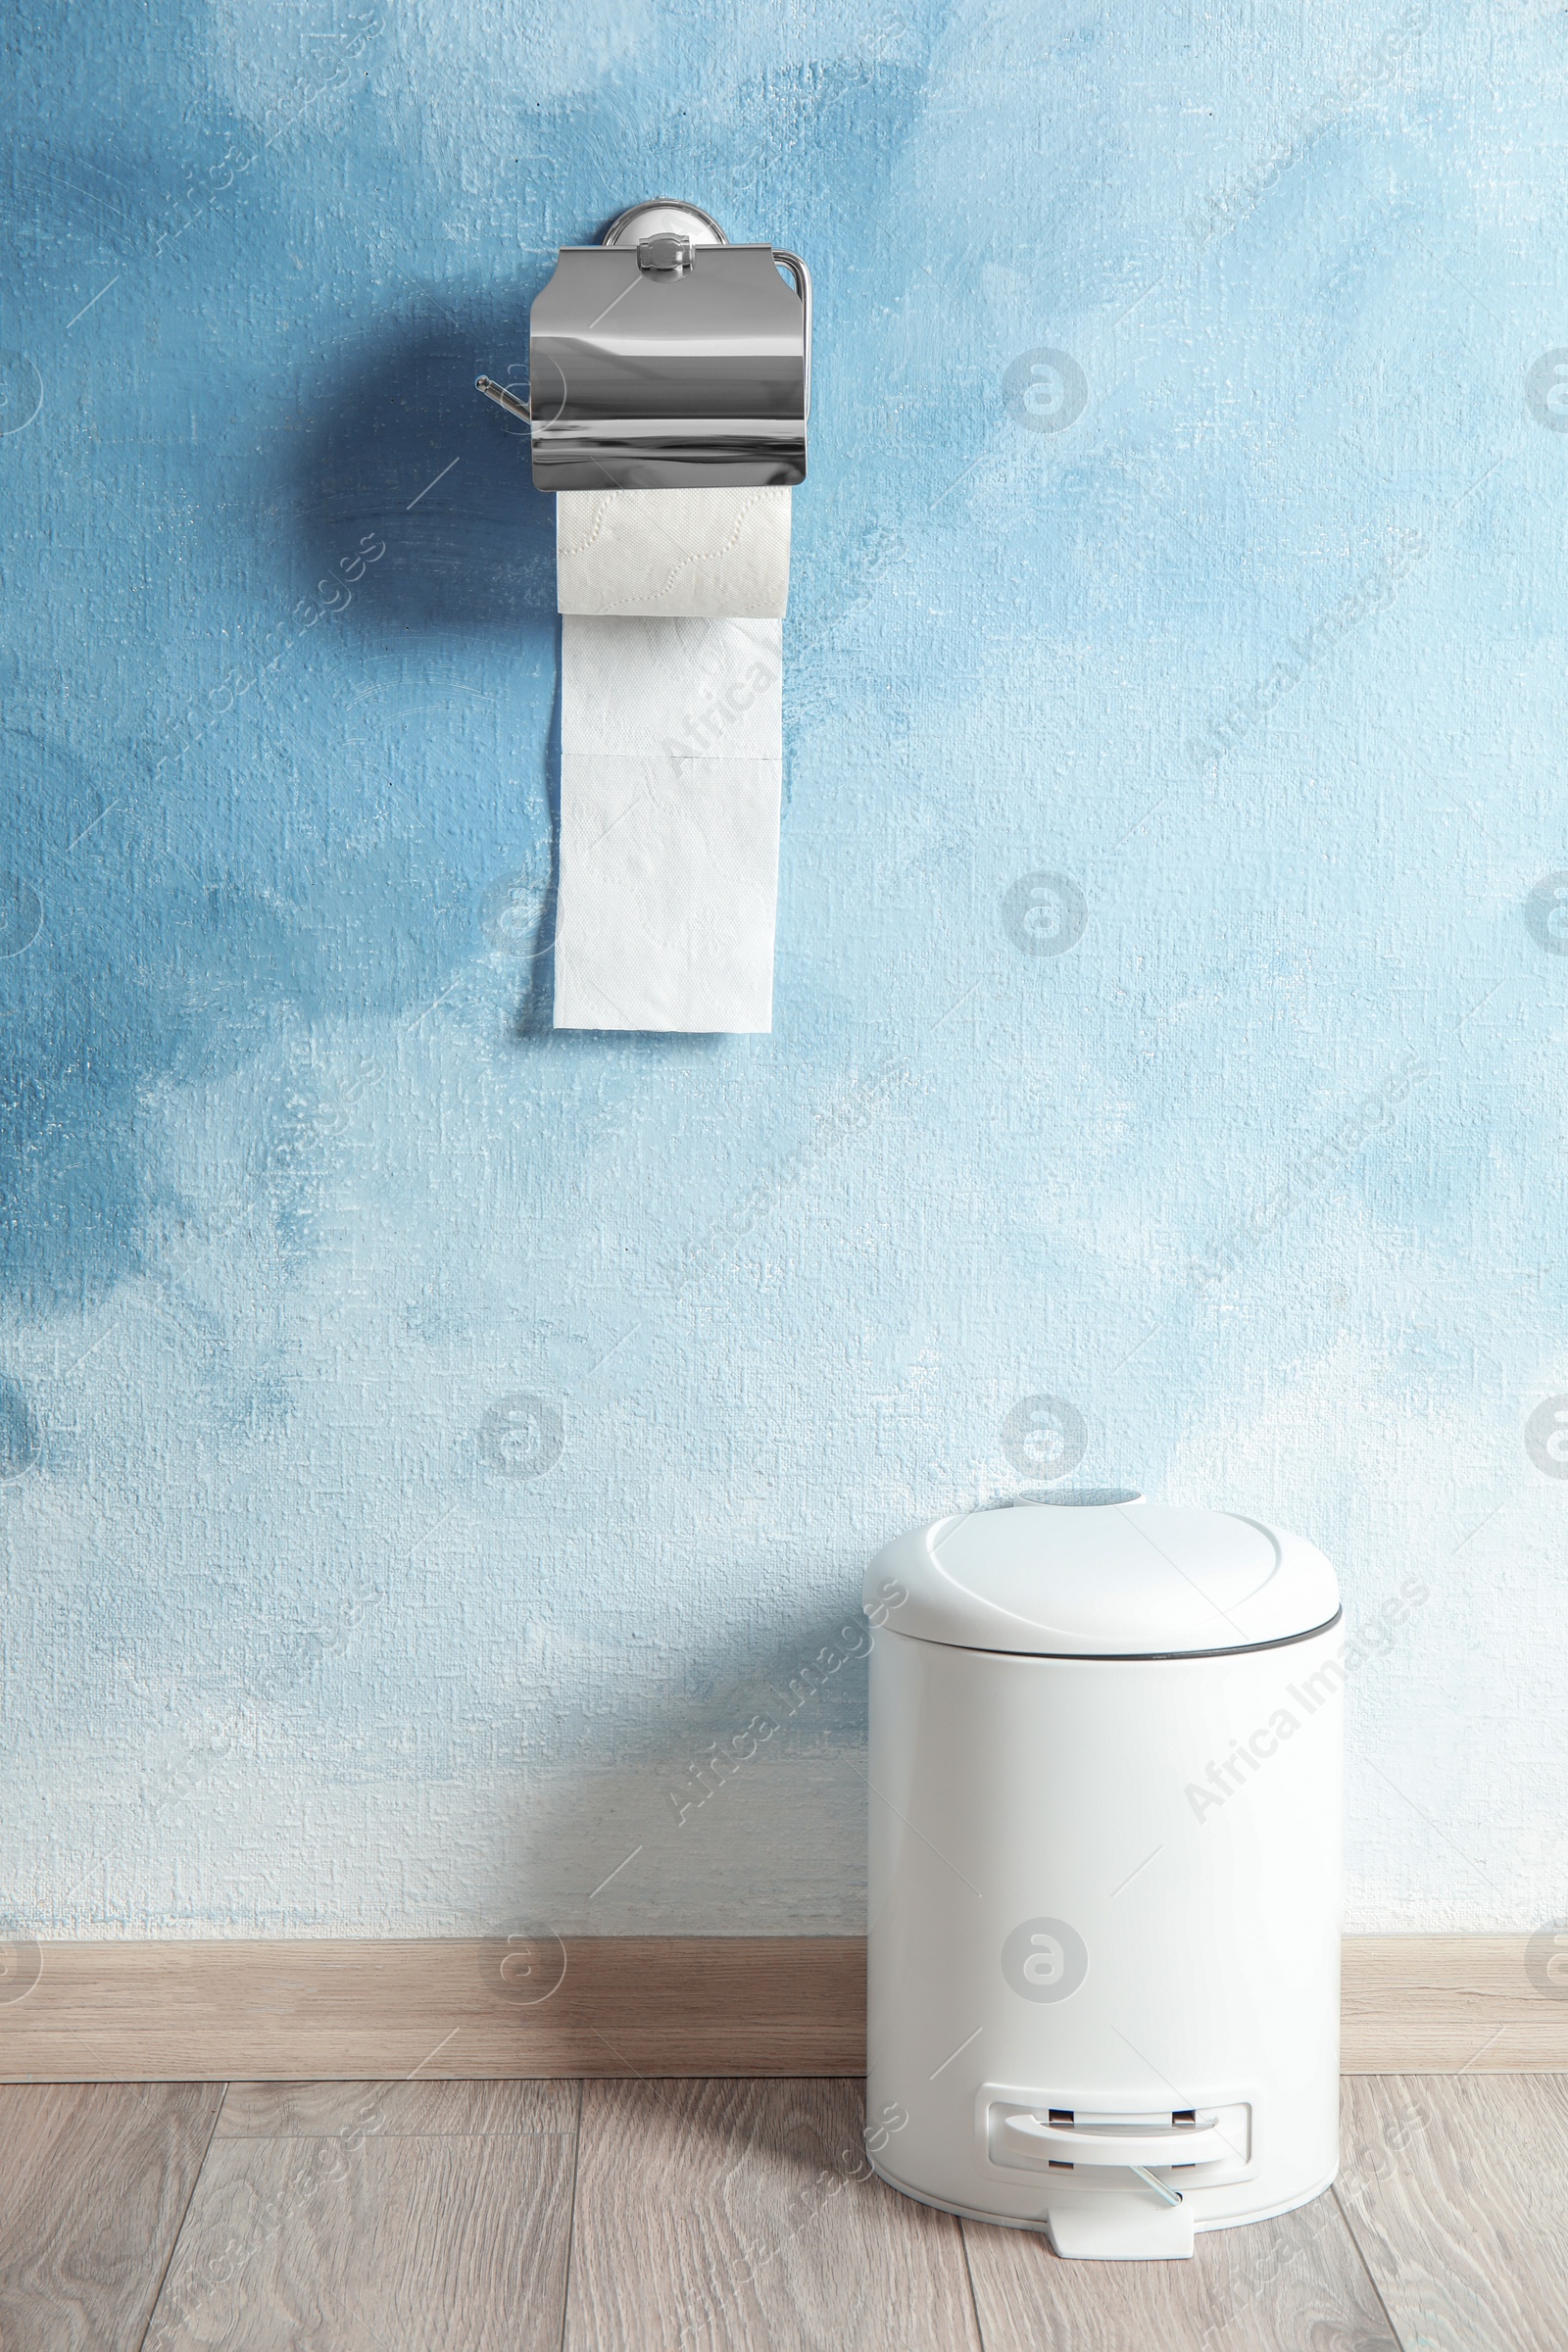 Photo of Toilet paper holder with roll and trash bin near color wall